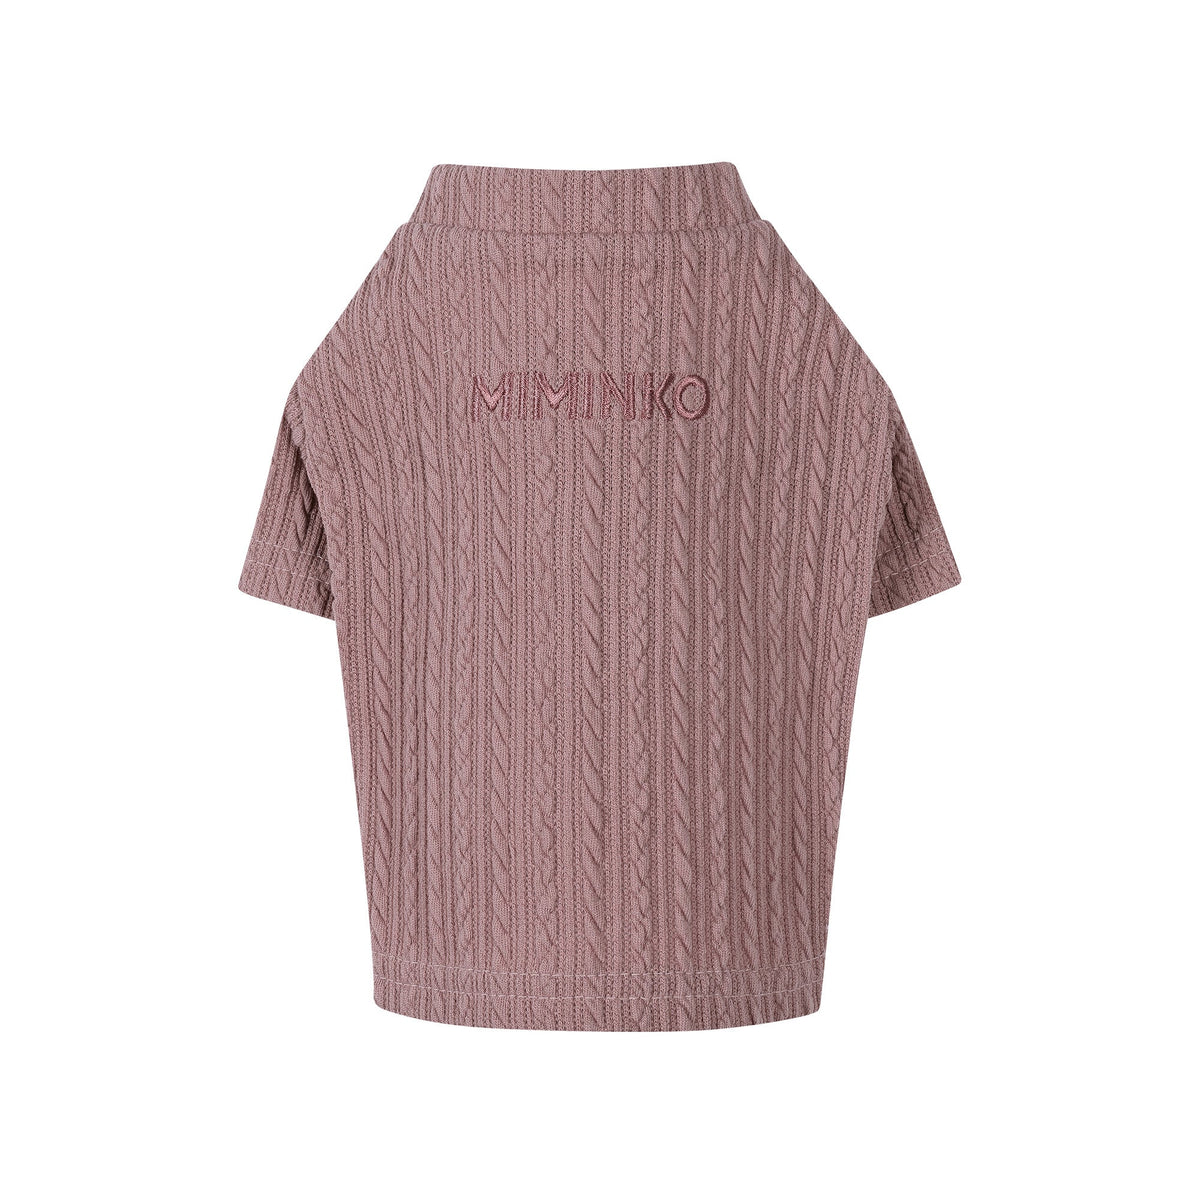 Sweater Weather Top - Pink